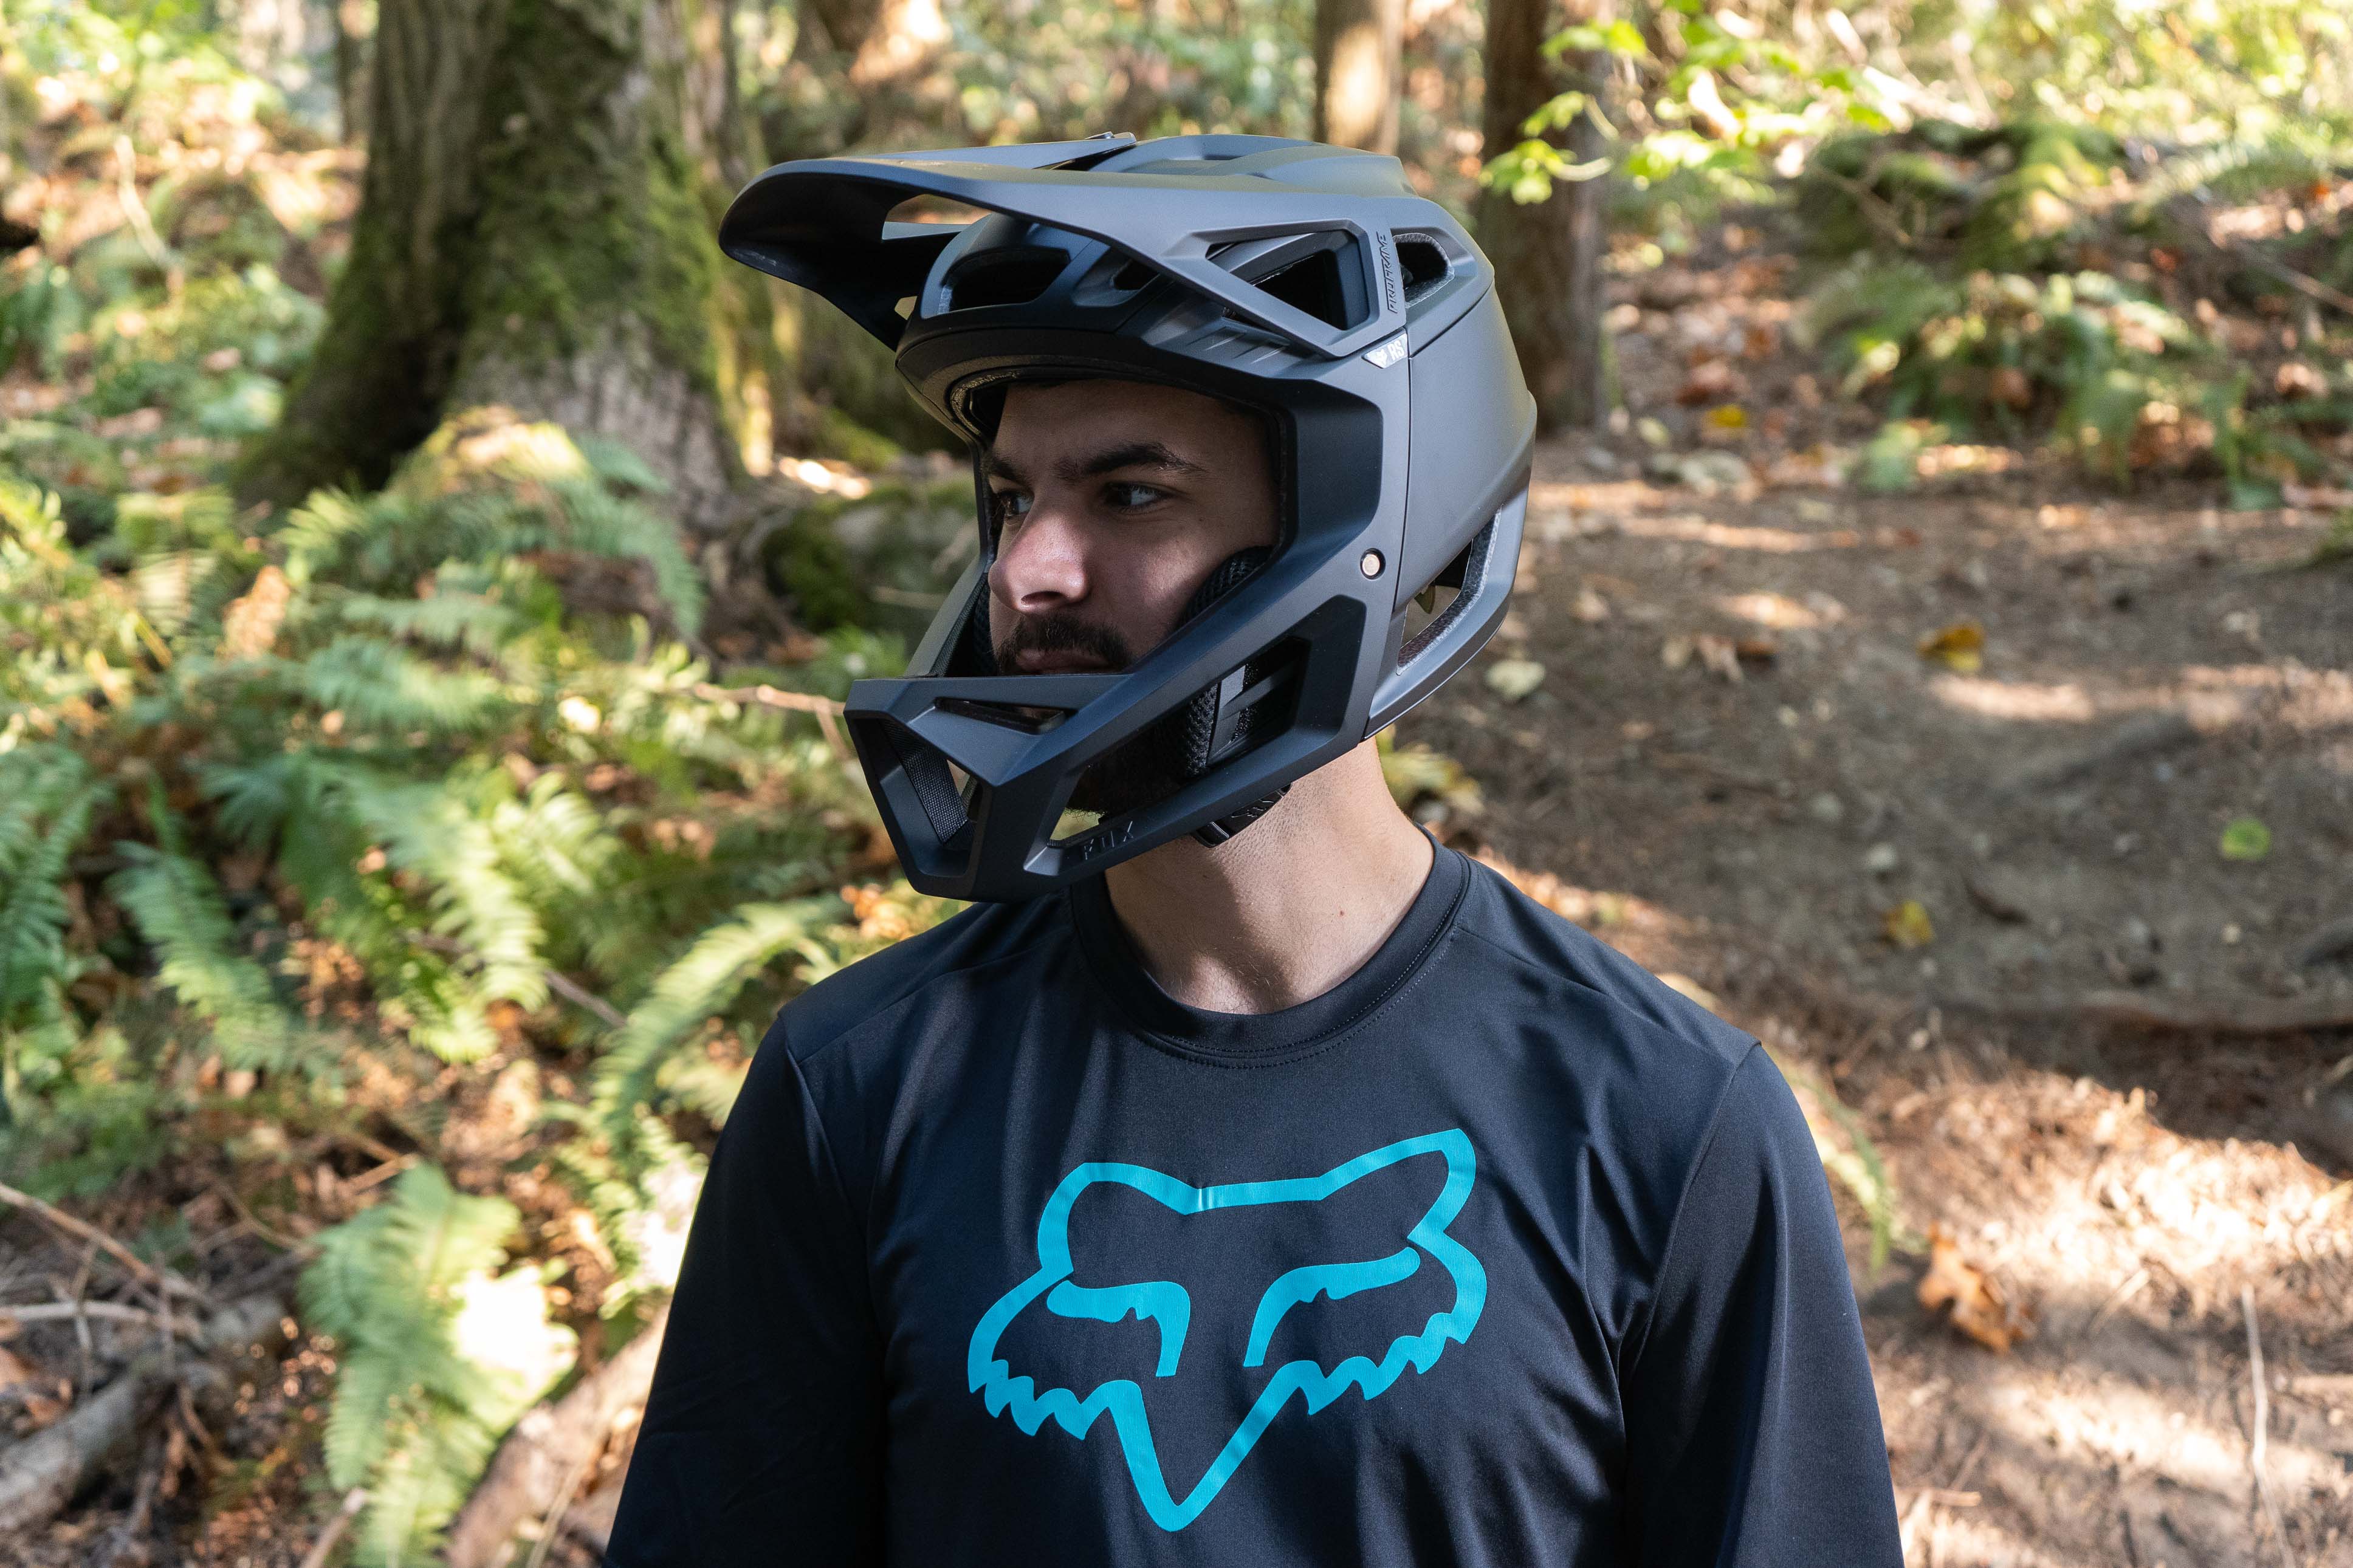 Fox Proframe RS Review